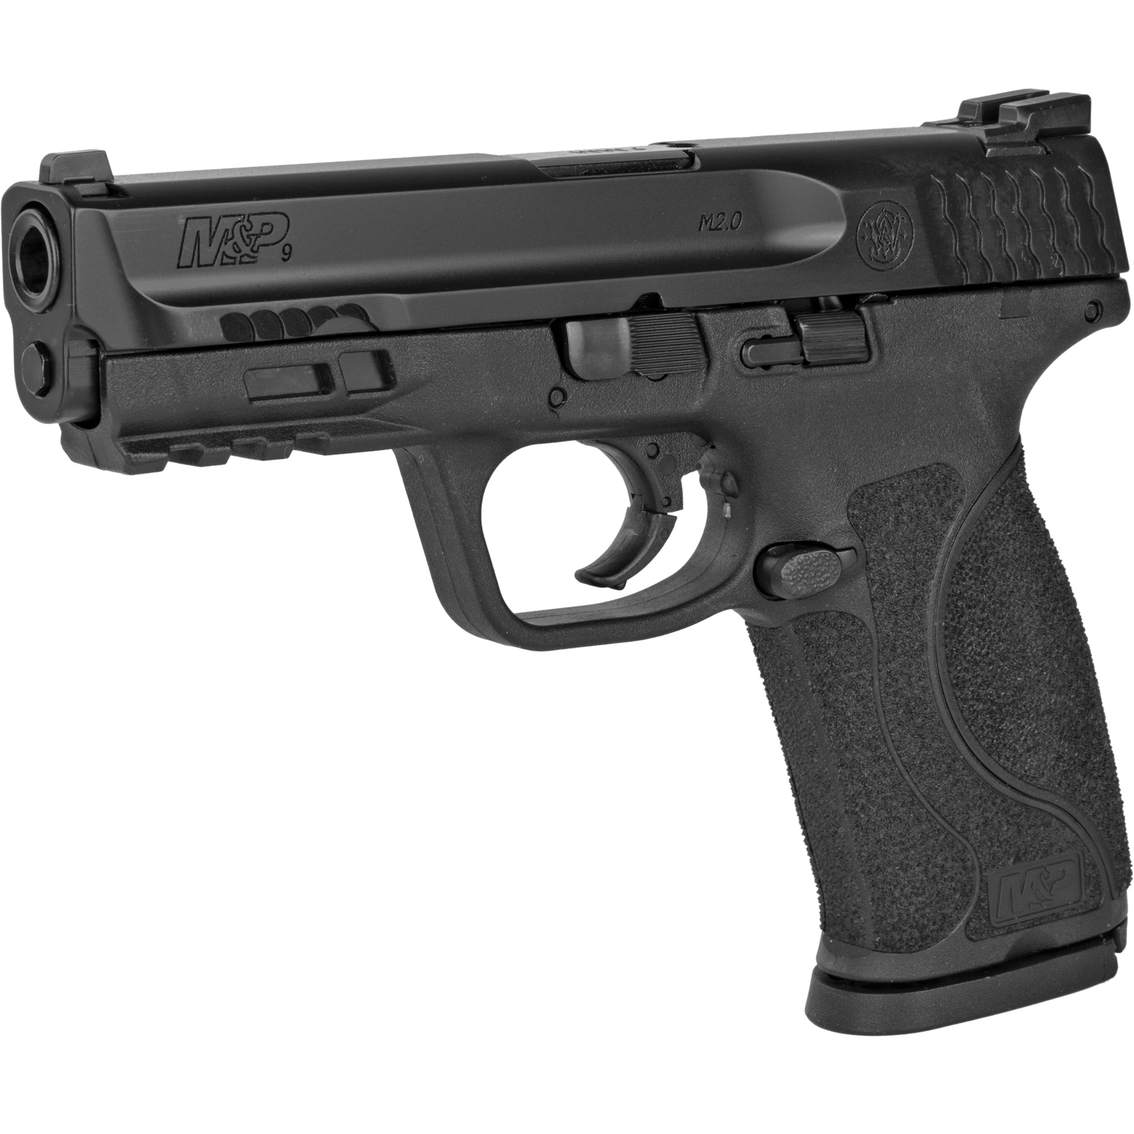 S&W M&P 2.0 9MM 4.25 in. Barrel 17 Rds 2-Mags Pistol Black - Image 3 of 3